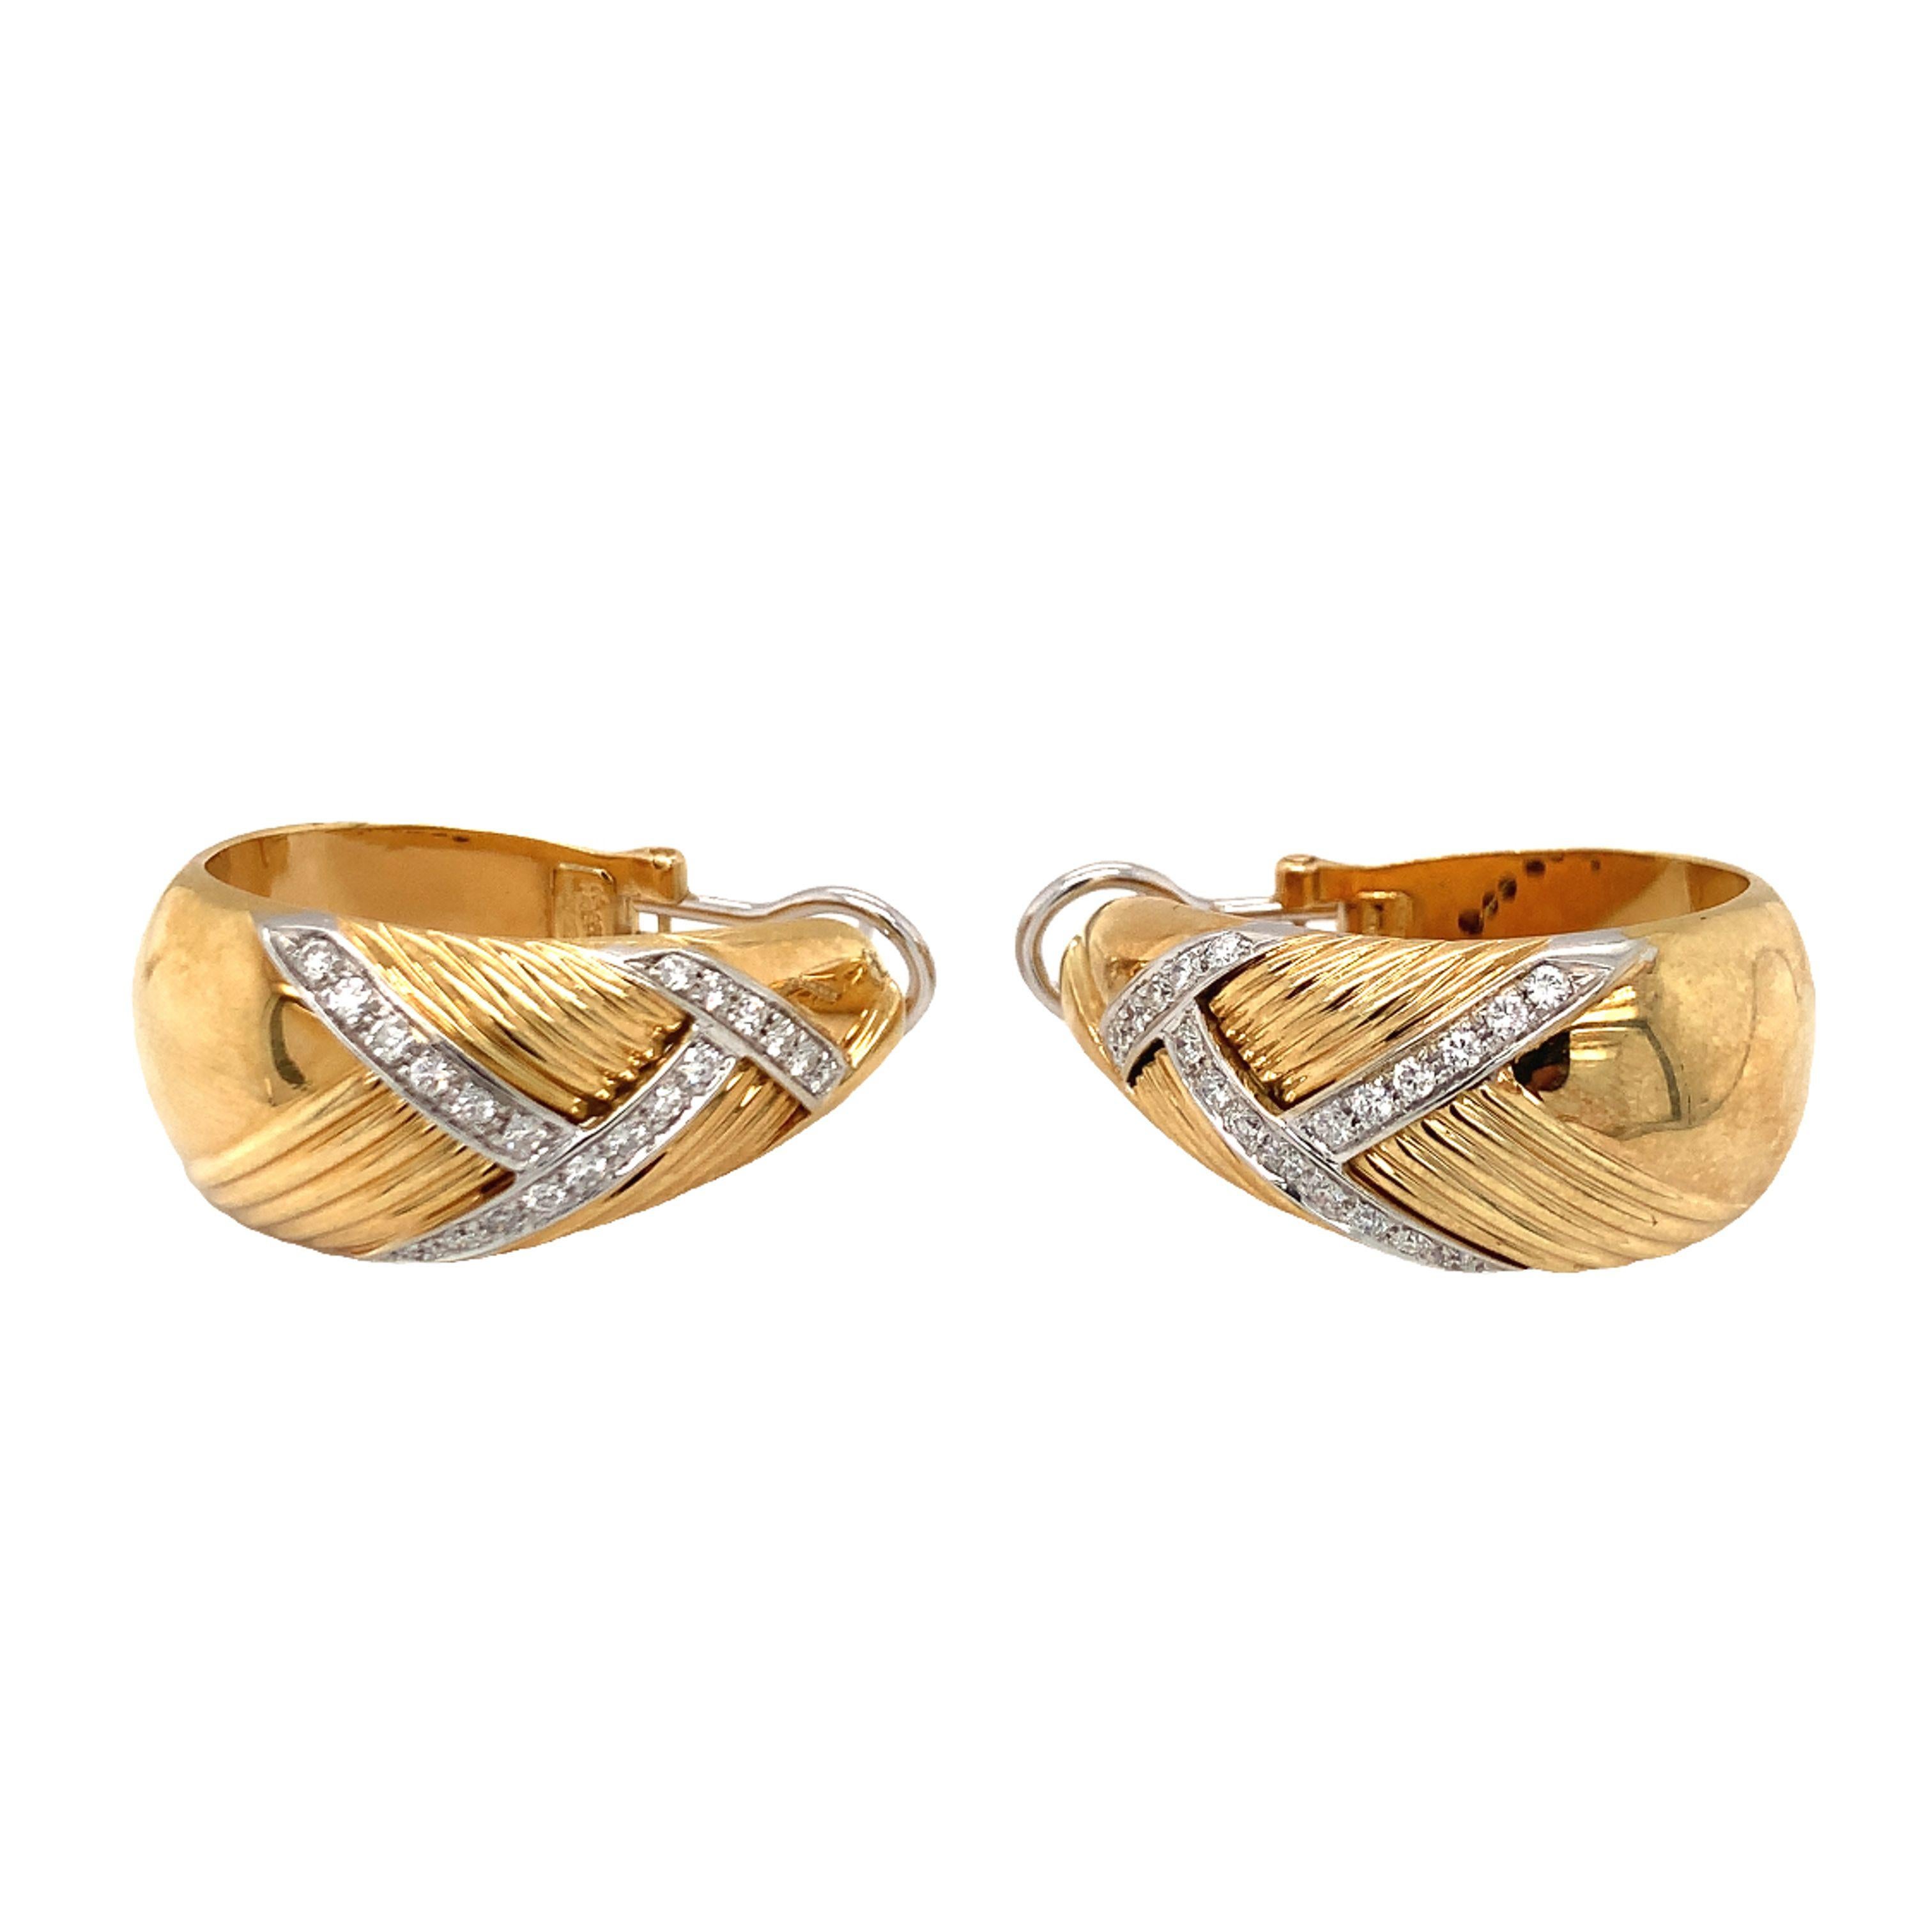 One pair of diamond ribbed hoop earrings in 18K yellow gold featuring forty round brilliant cut diamonds weighing 1.20 ct. with G color and VS-1 clarity. With posts and Omega backs and Italian hallmarks. Circa 1970s.

Statement, luxurious,